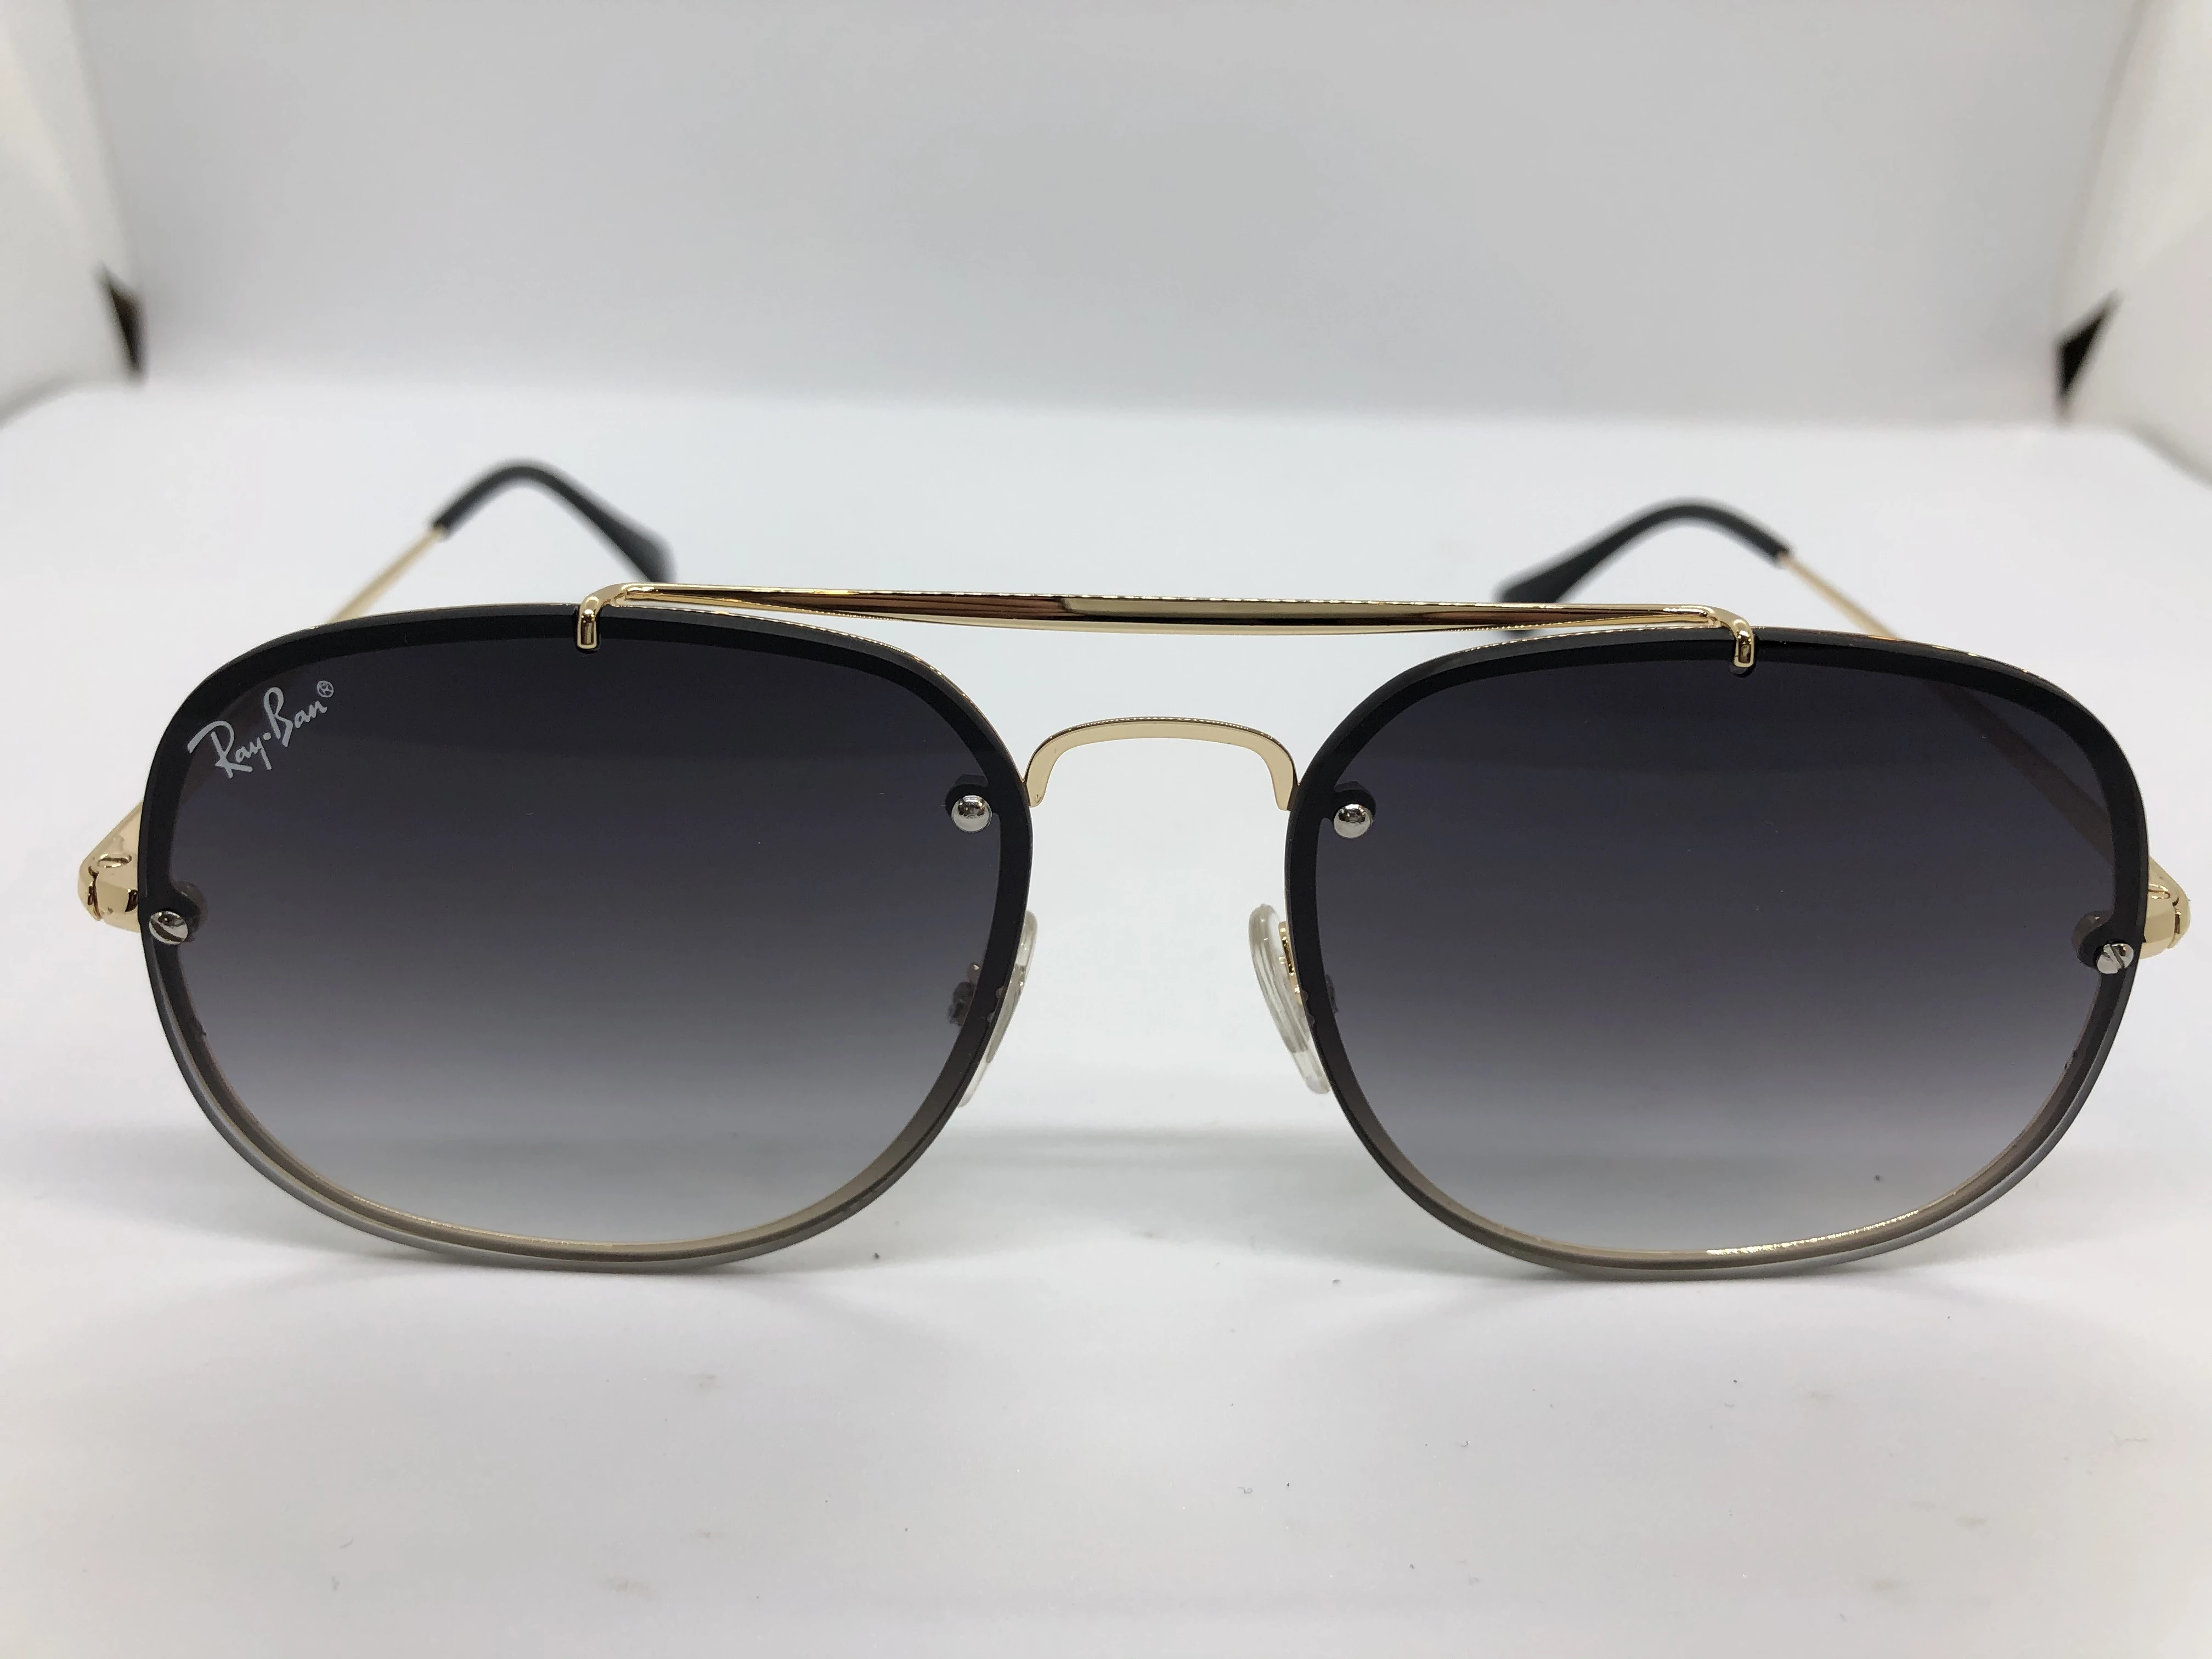 Sunglasses - from Ray Ban - with a golden metal frame - and gradient colored lenses - and a golden metal arm - for men